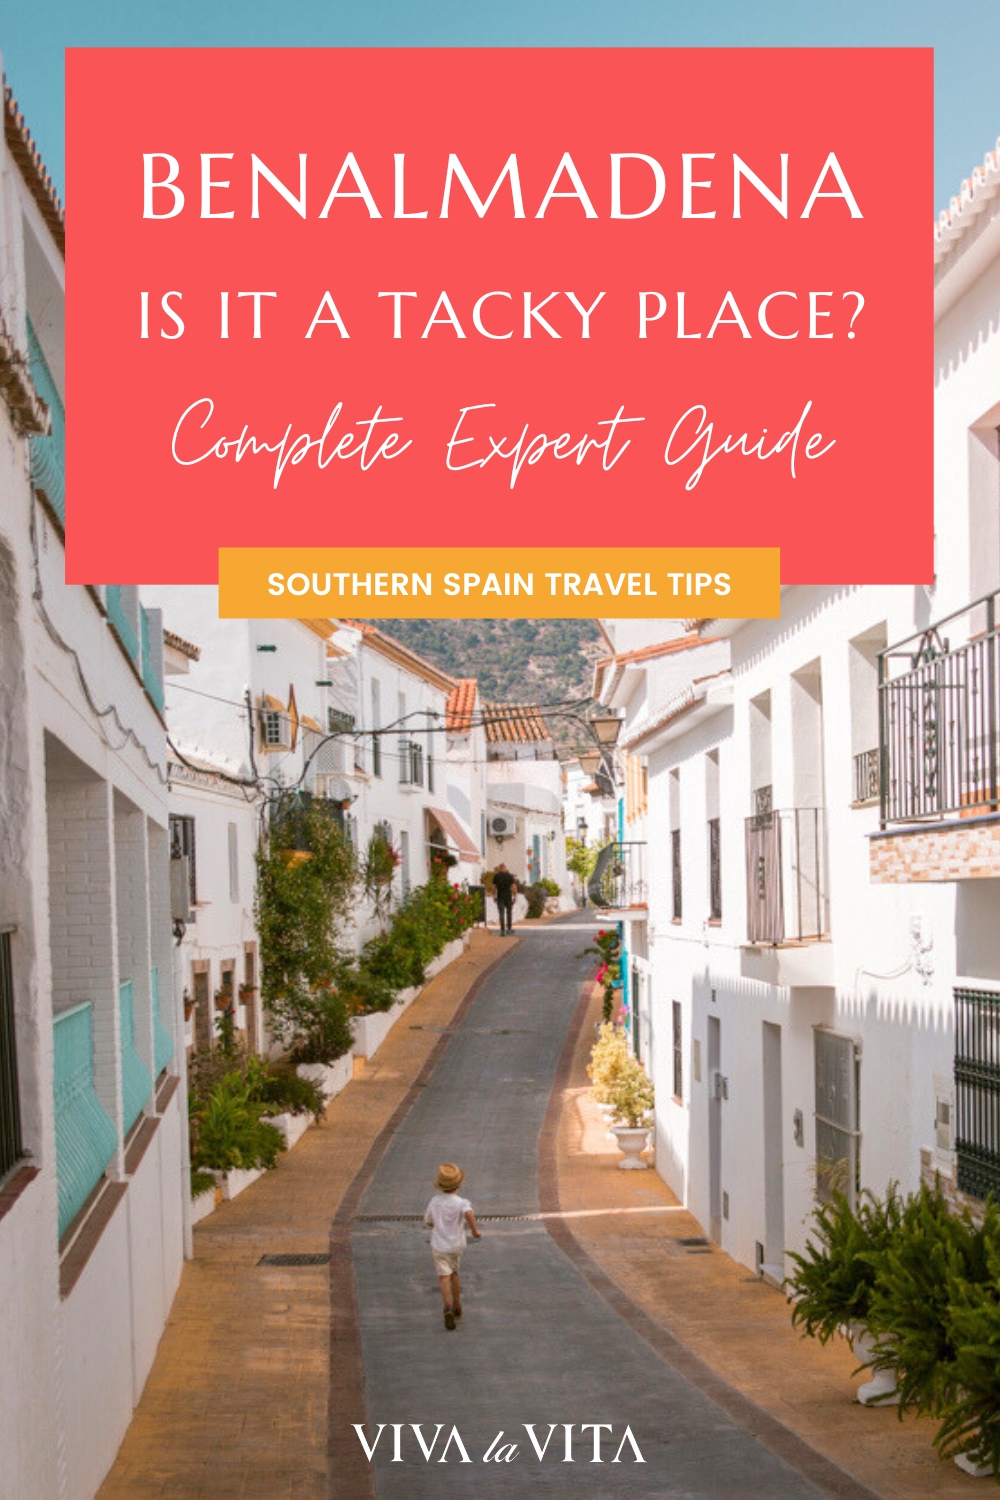 pinterest image showing the old town in benalmadena, with headline that reads: benalmadena is it a tacky place, complete expert guide, southern spain travel tips